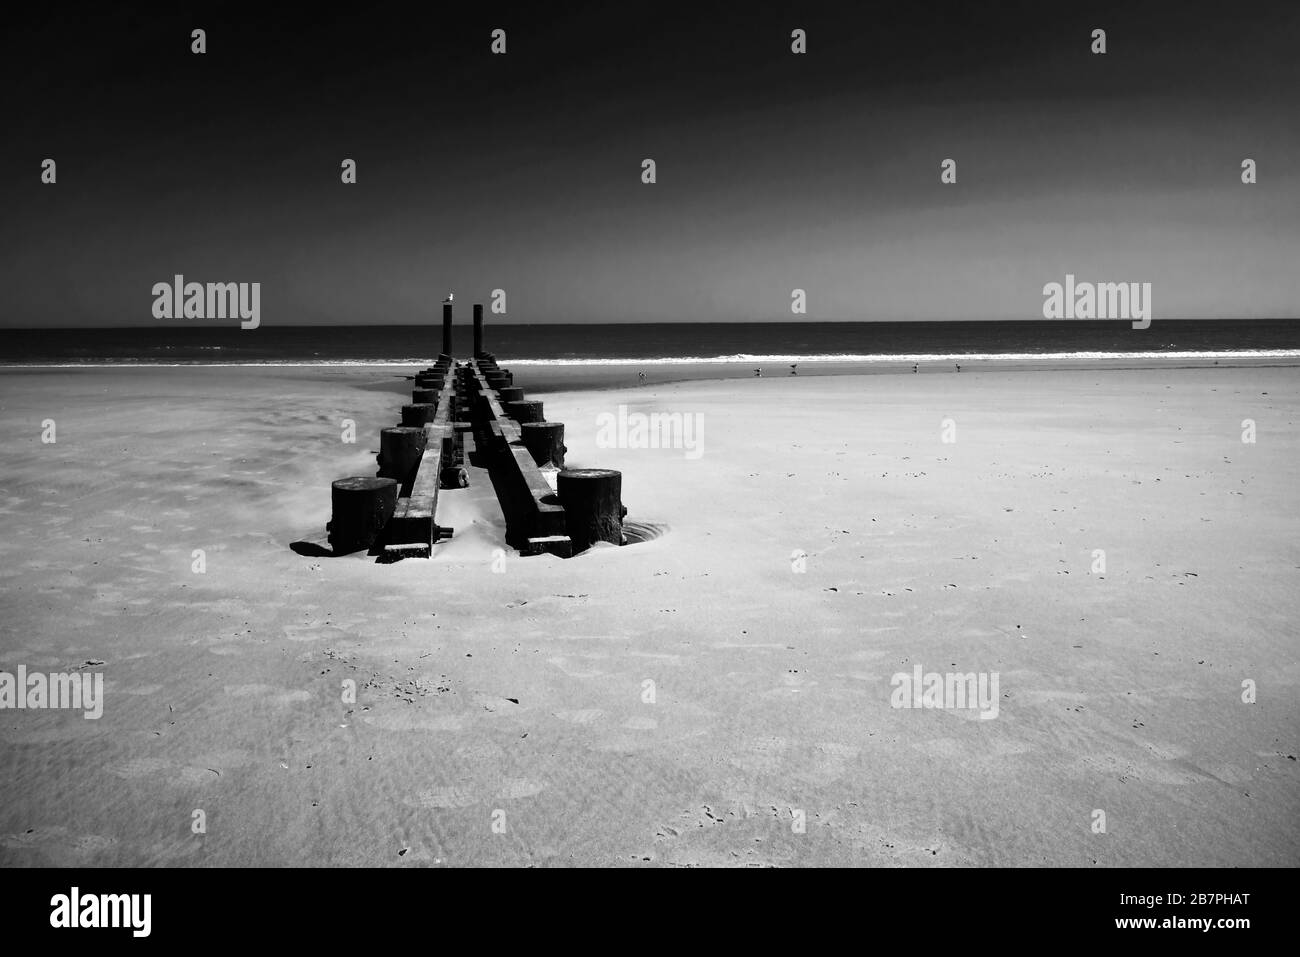 Logs on beach Black and White Stock Photos & Images - Alamy